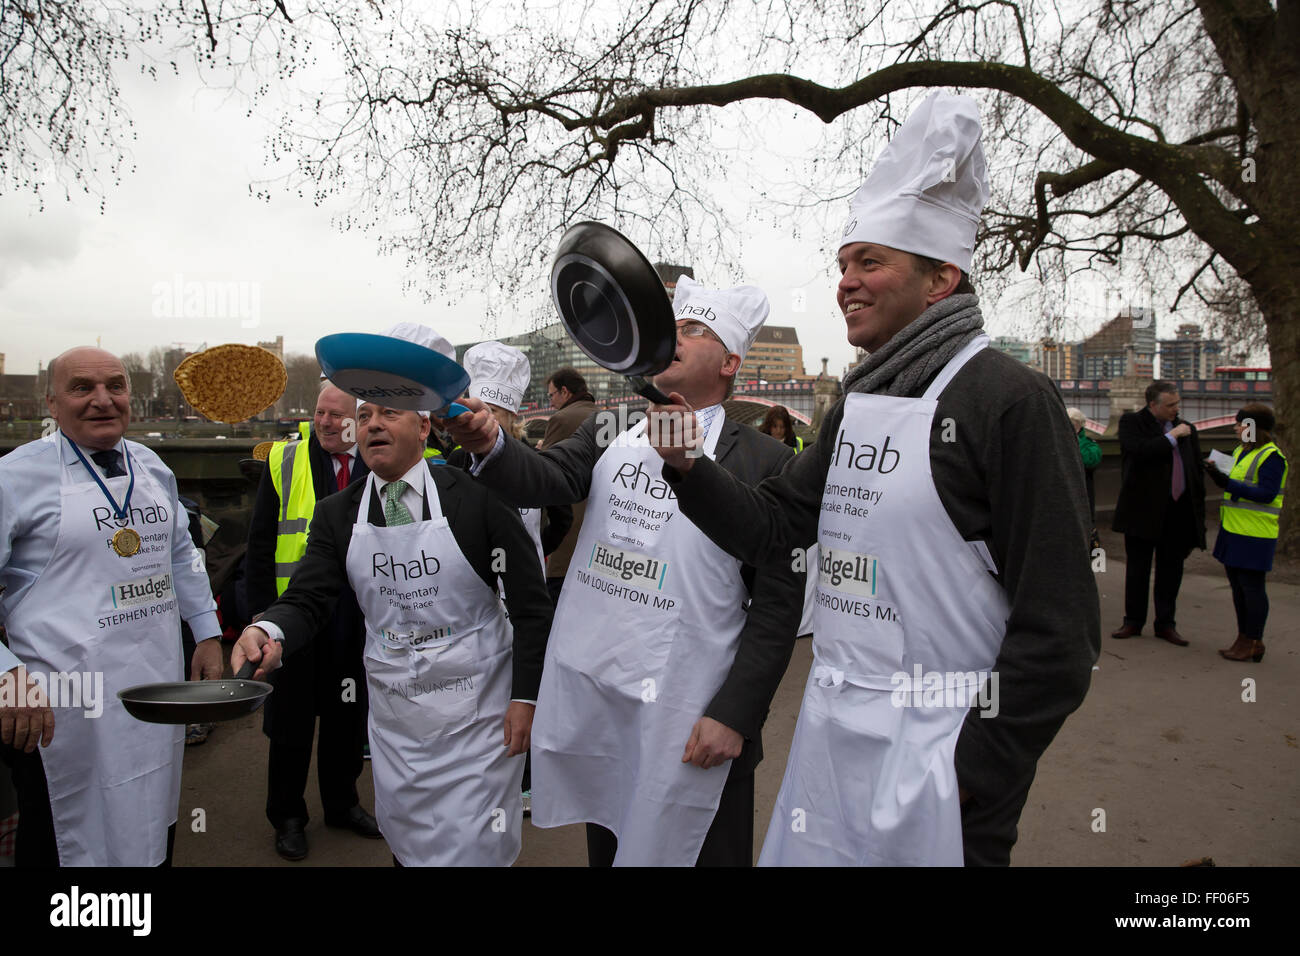 Westminster,UK,9th February 2016,Rehab Parliamentary Pancake Race 2016 takes place as runners representing the House of Commons, the House of Lords and the Parliamentary Press Gallery race against each other while tossing pancake Credit: Keith Larby/Alamy Live News Stock Photo